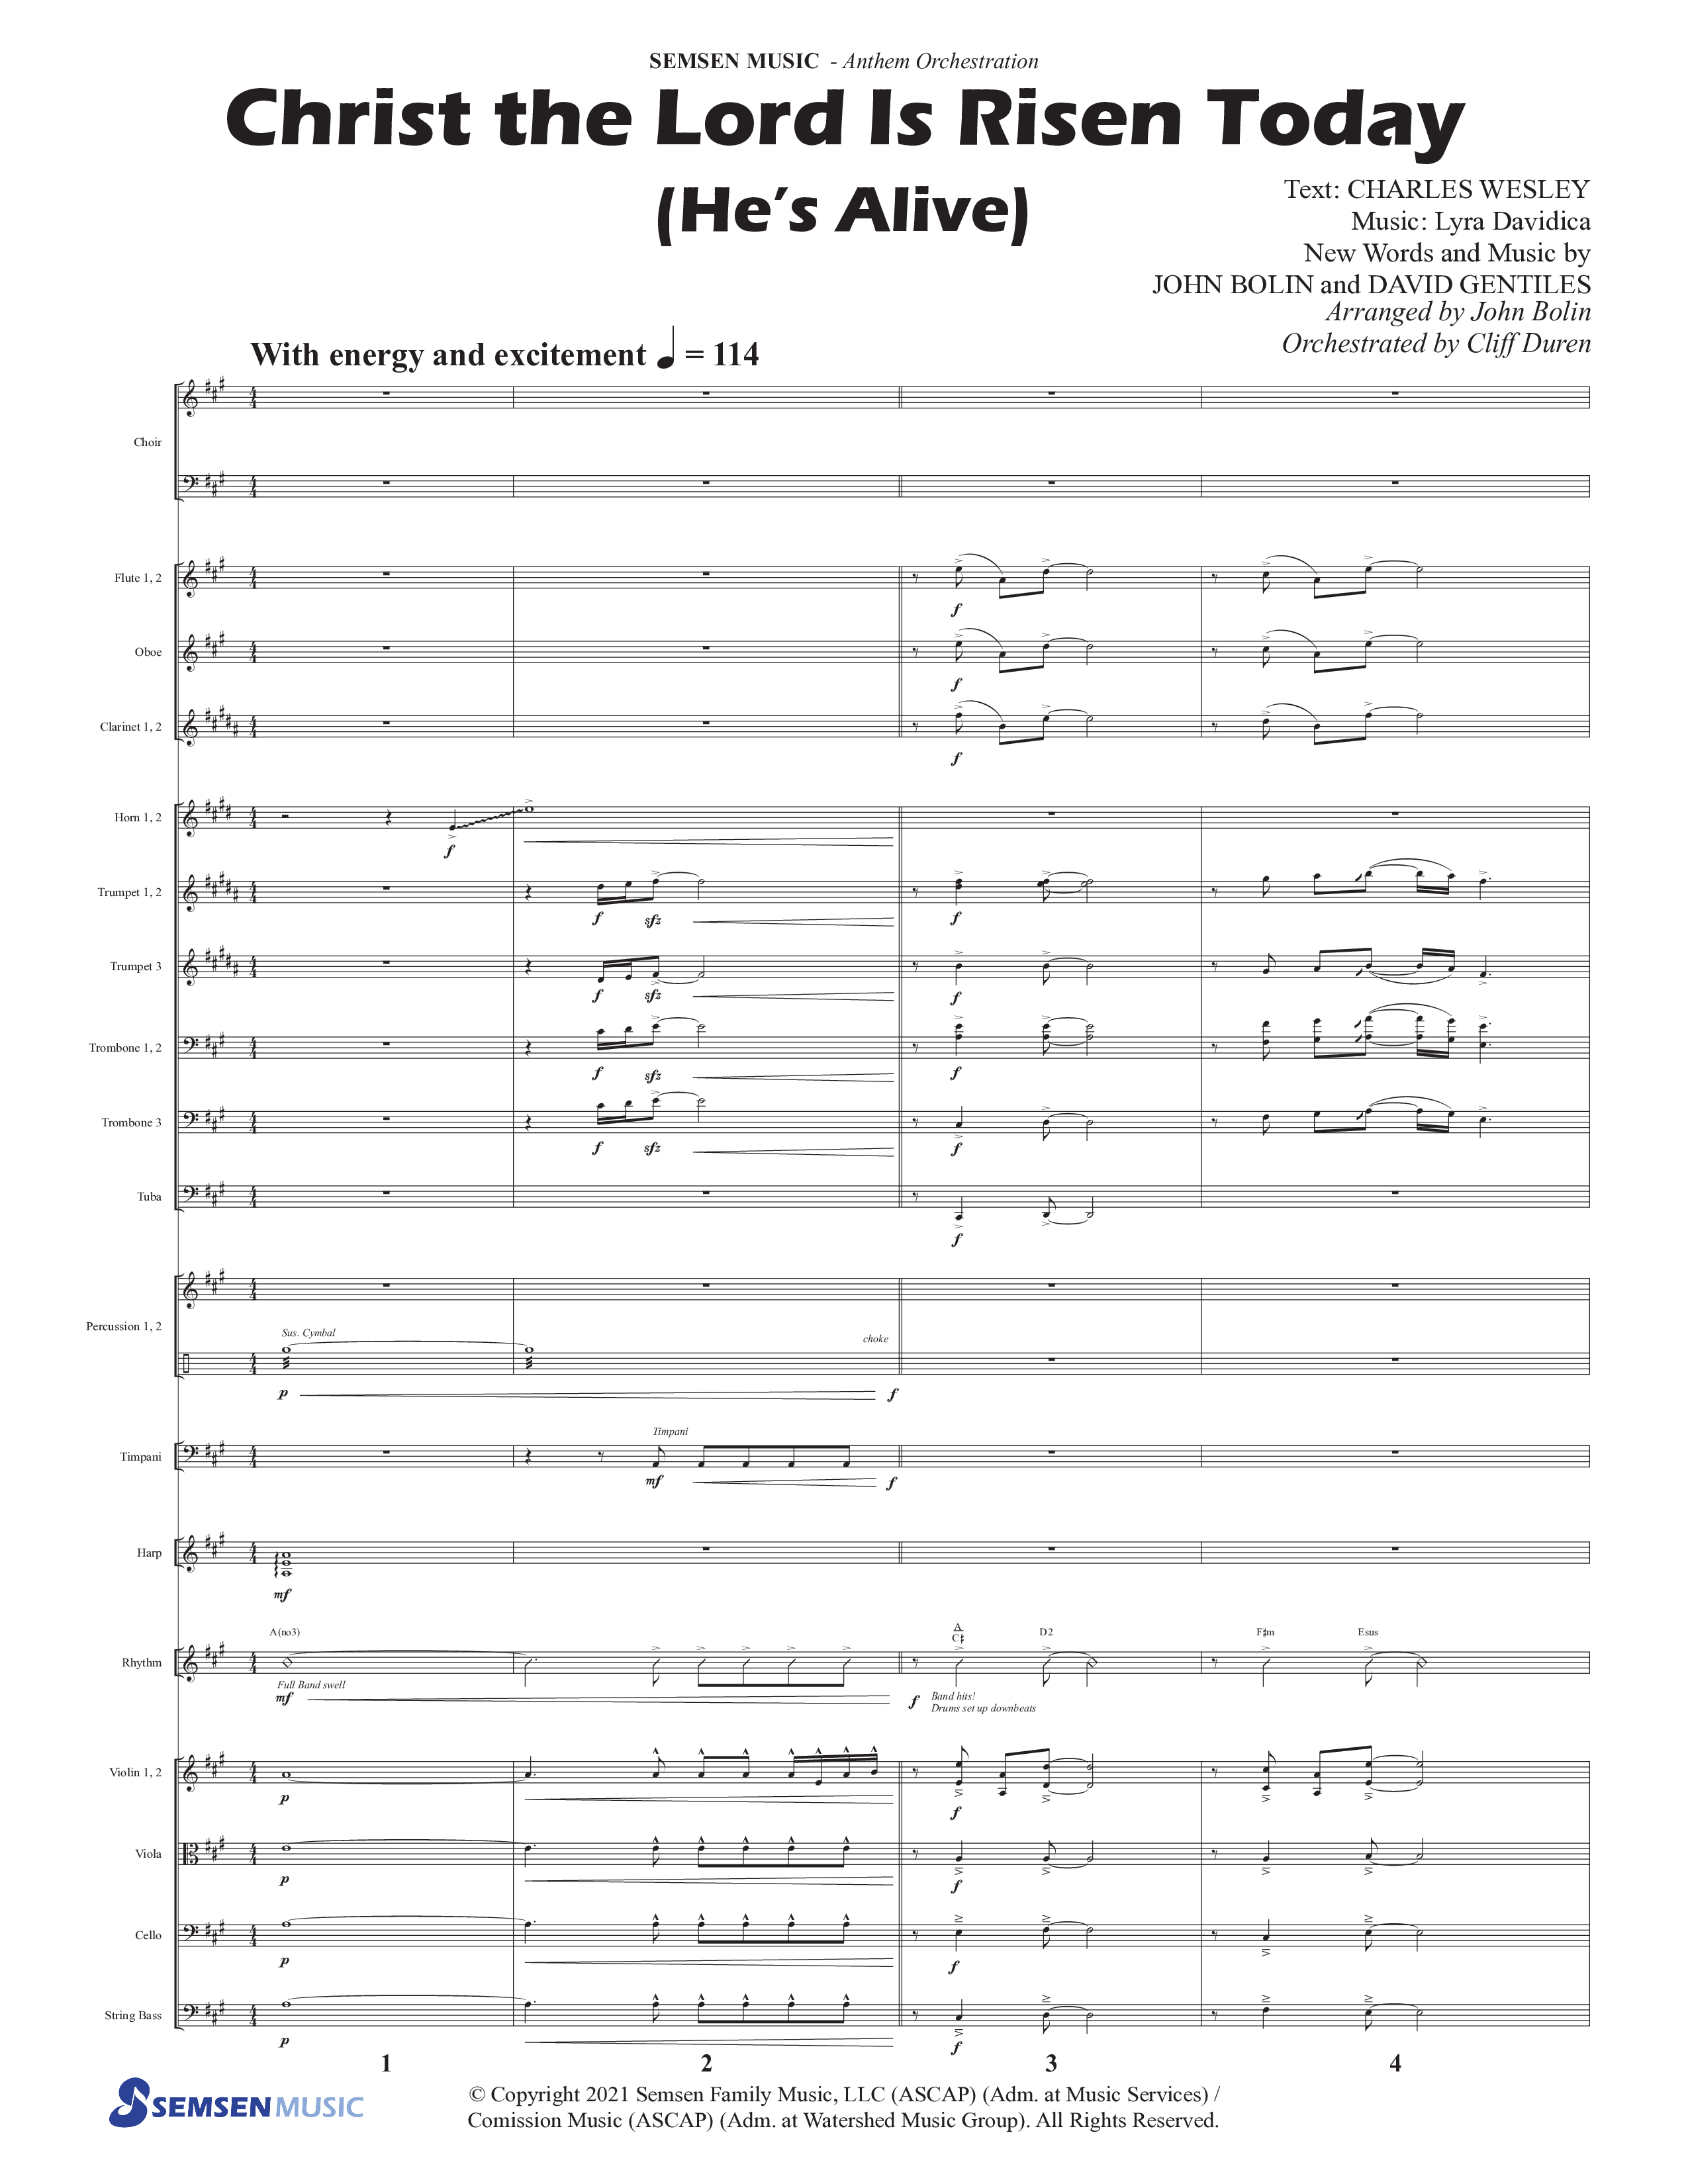 Christ The Lord Is Risen Today (He's Alive) (Choral Anthem SATB) Orchestration (Semsen Music / Arr. John Bolin / Orch. Cliff Duren)